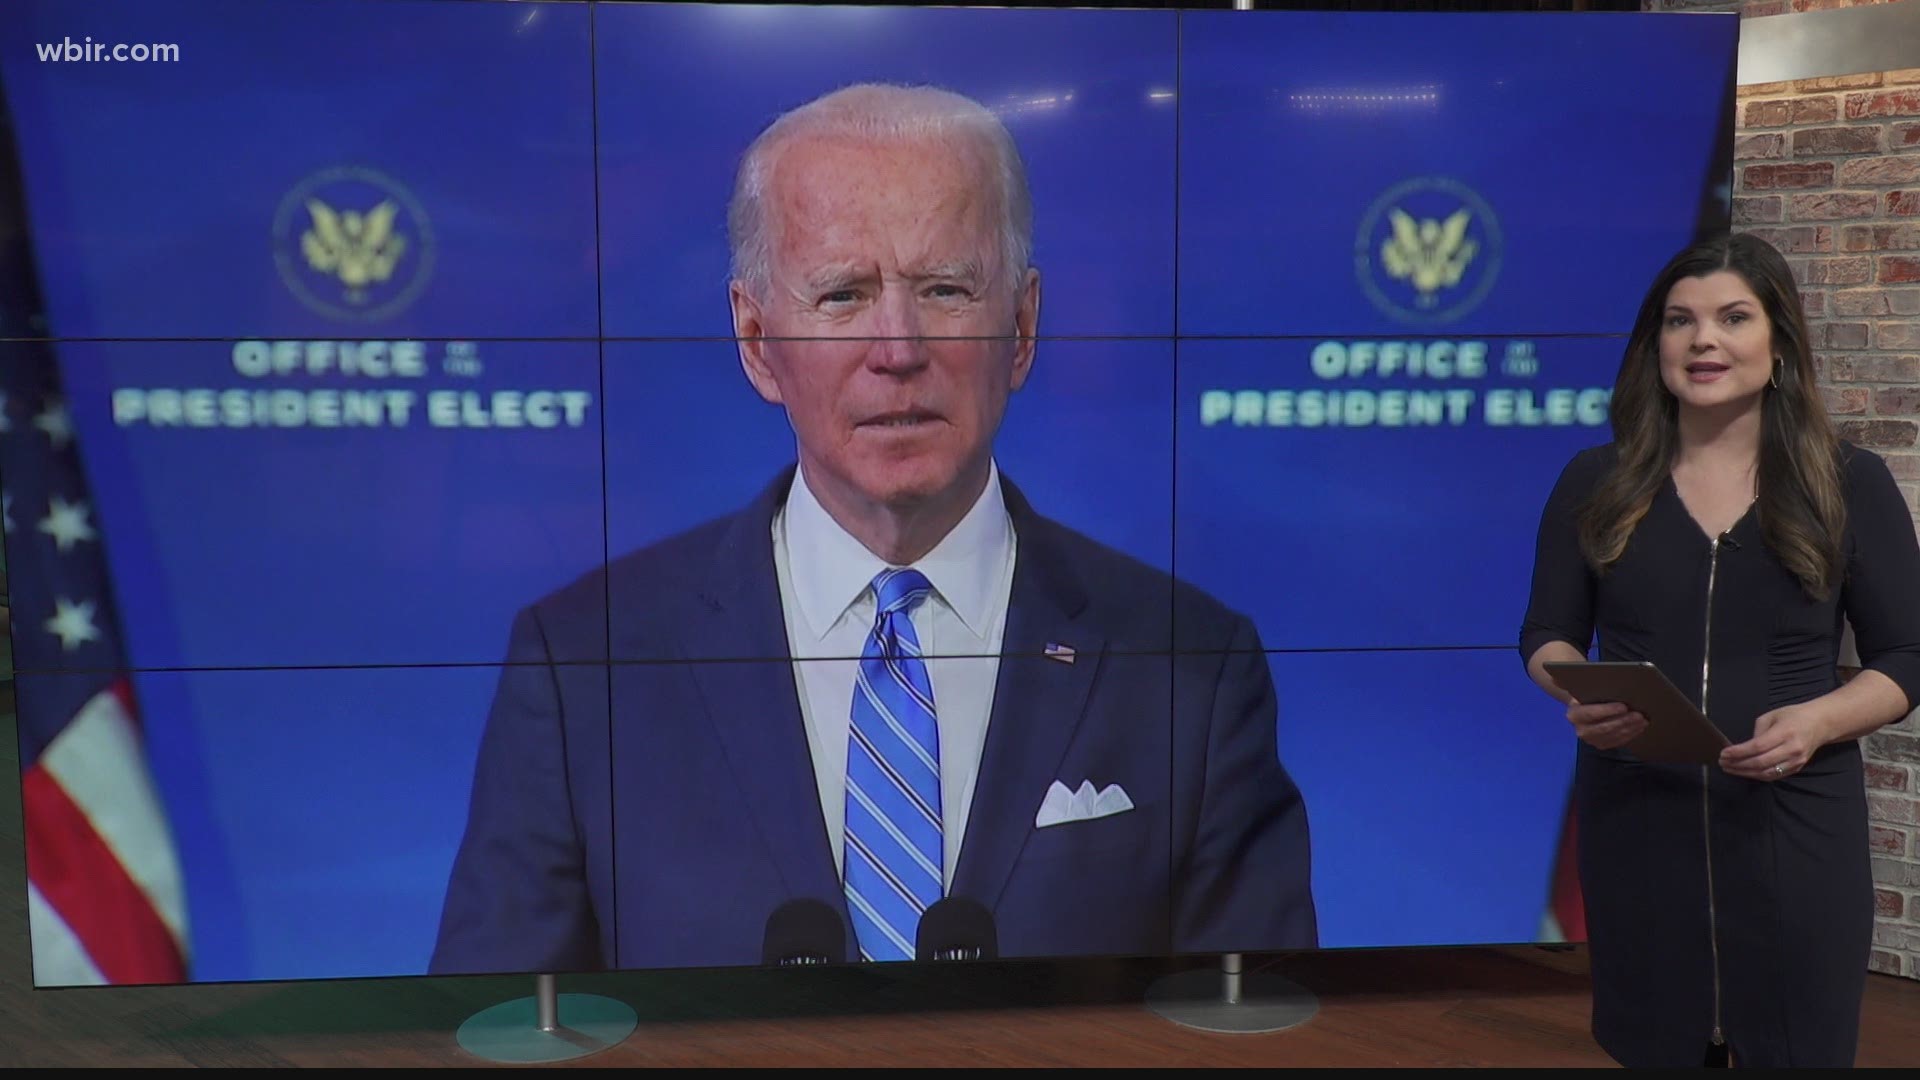 President-Elect Joe Biden is now sharing his plan for fighting the pandemic while helping the economy.